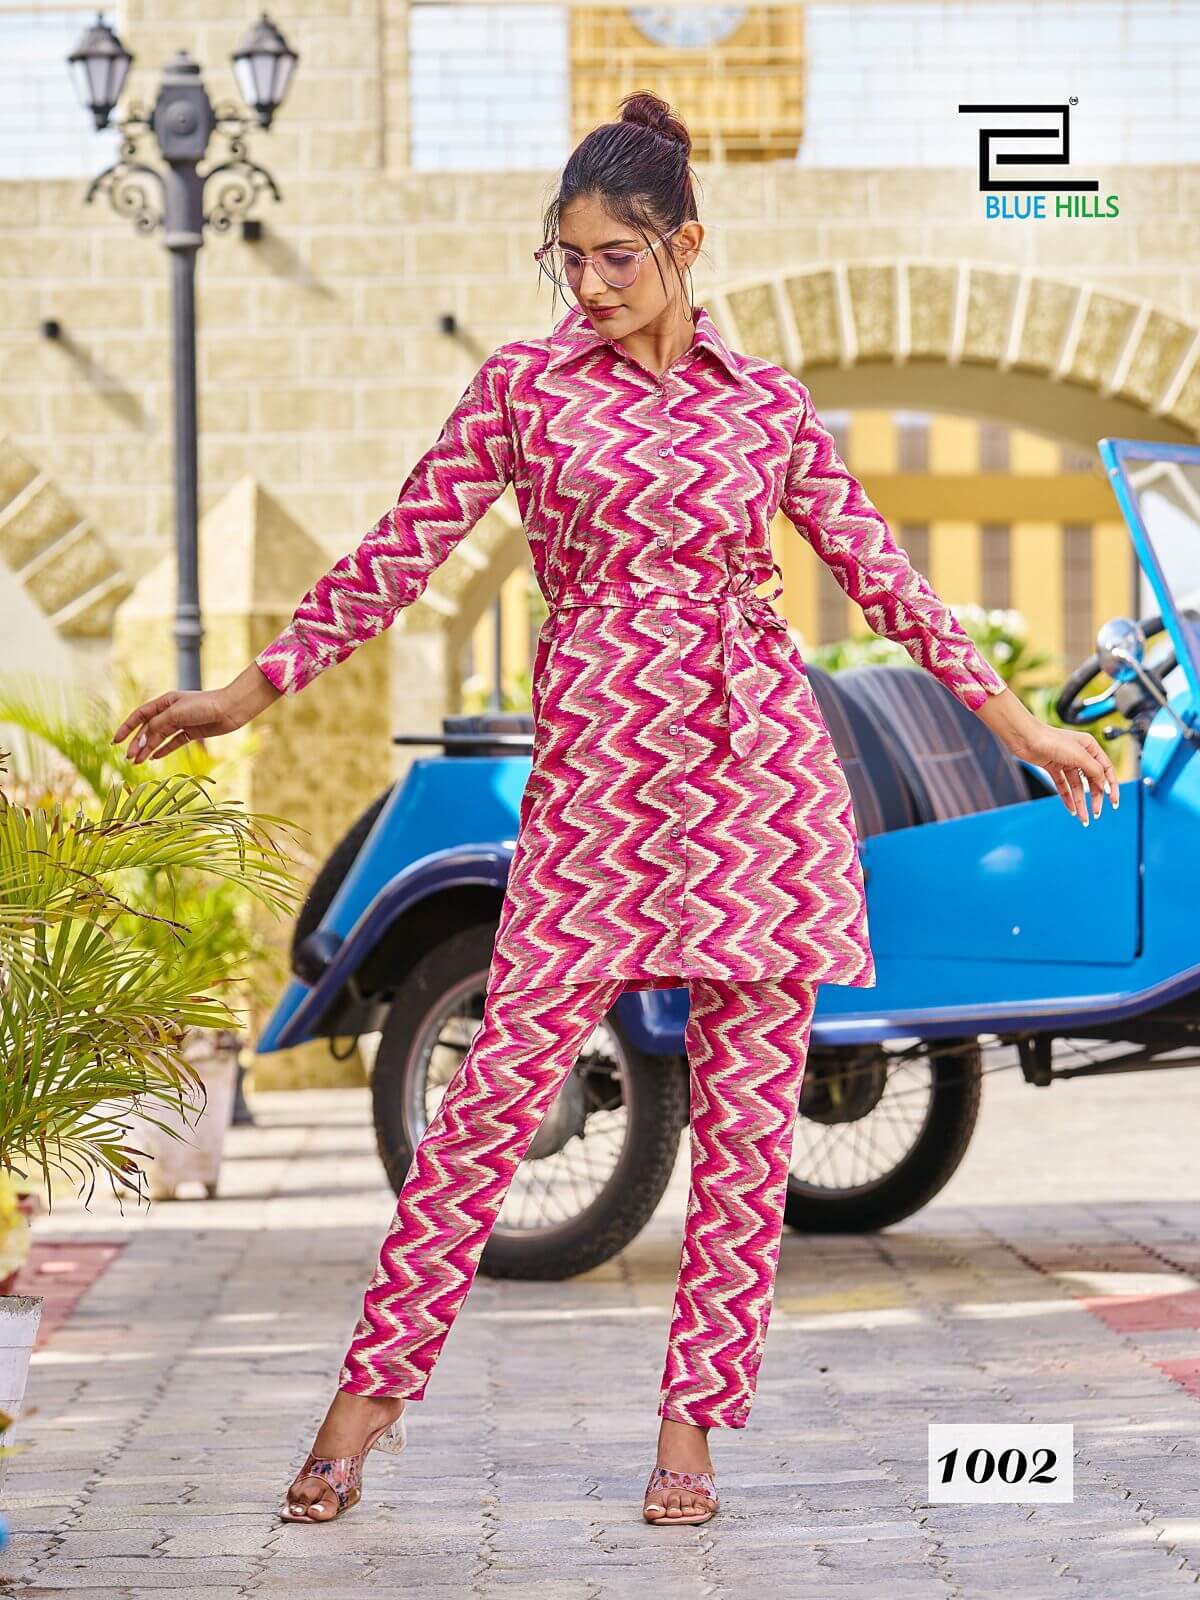 Blue Hills Pretty Girl Co Ord Set Catalog collection 5